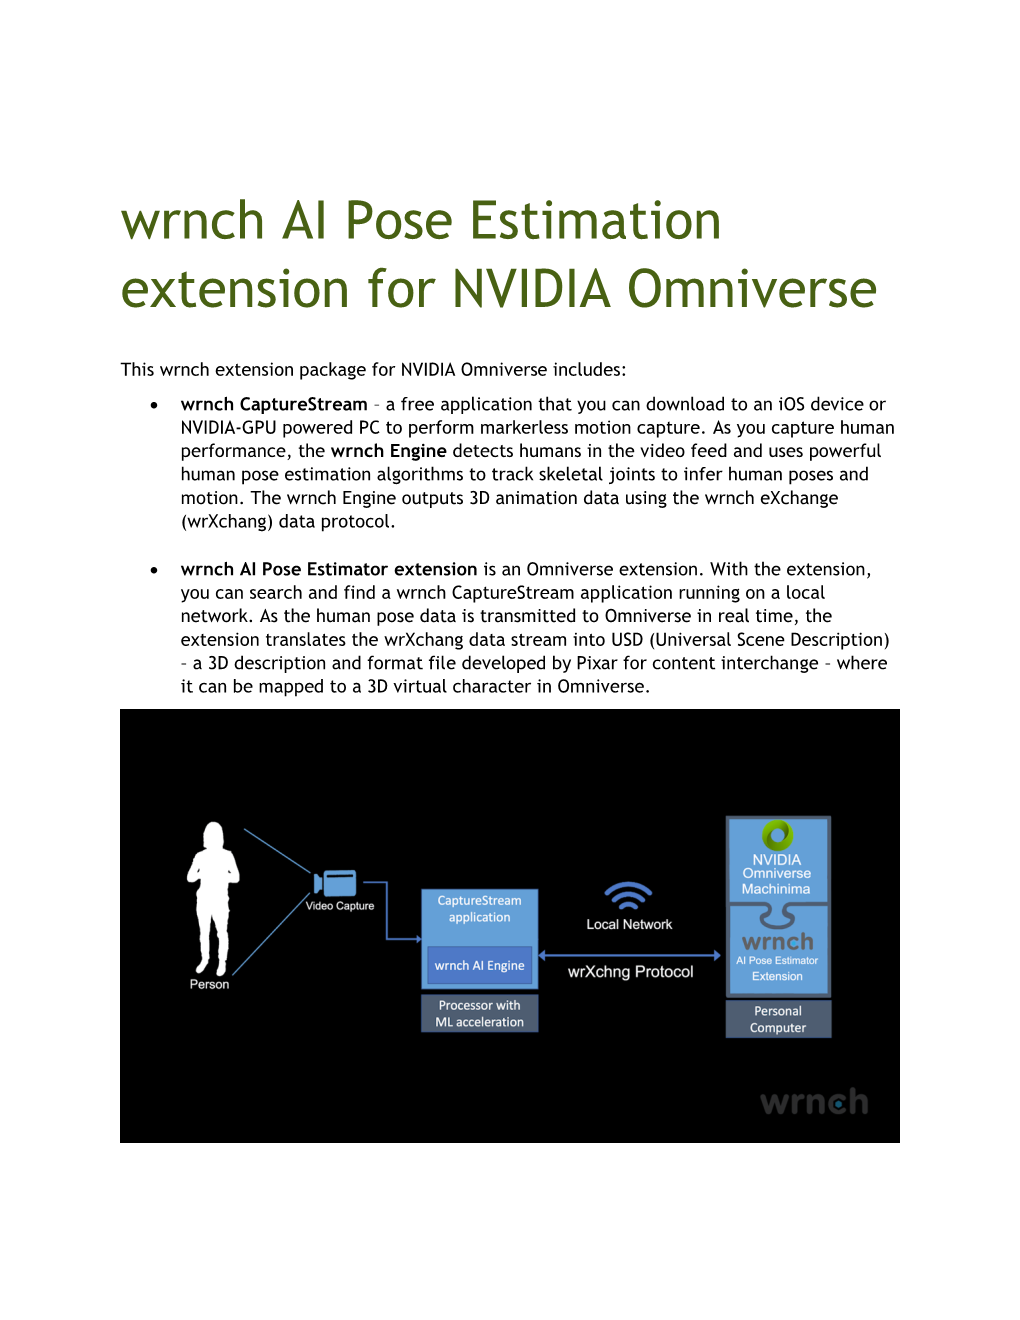 Wrnch AI Pose Estimation Extension for NVIDIA Omniverse